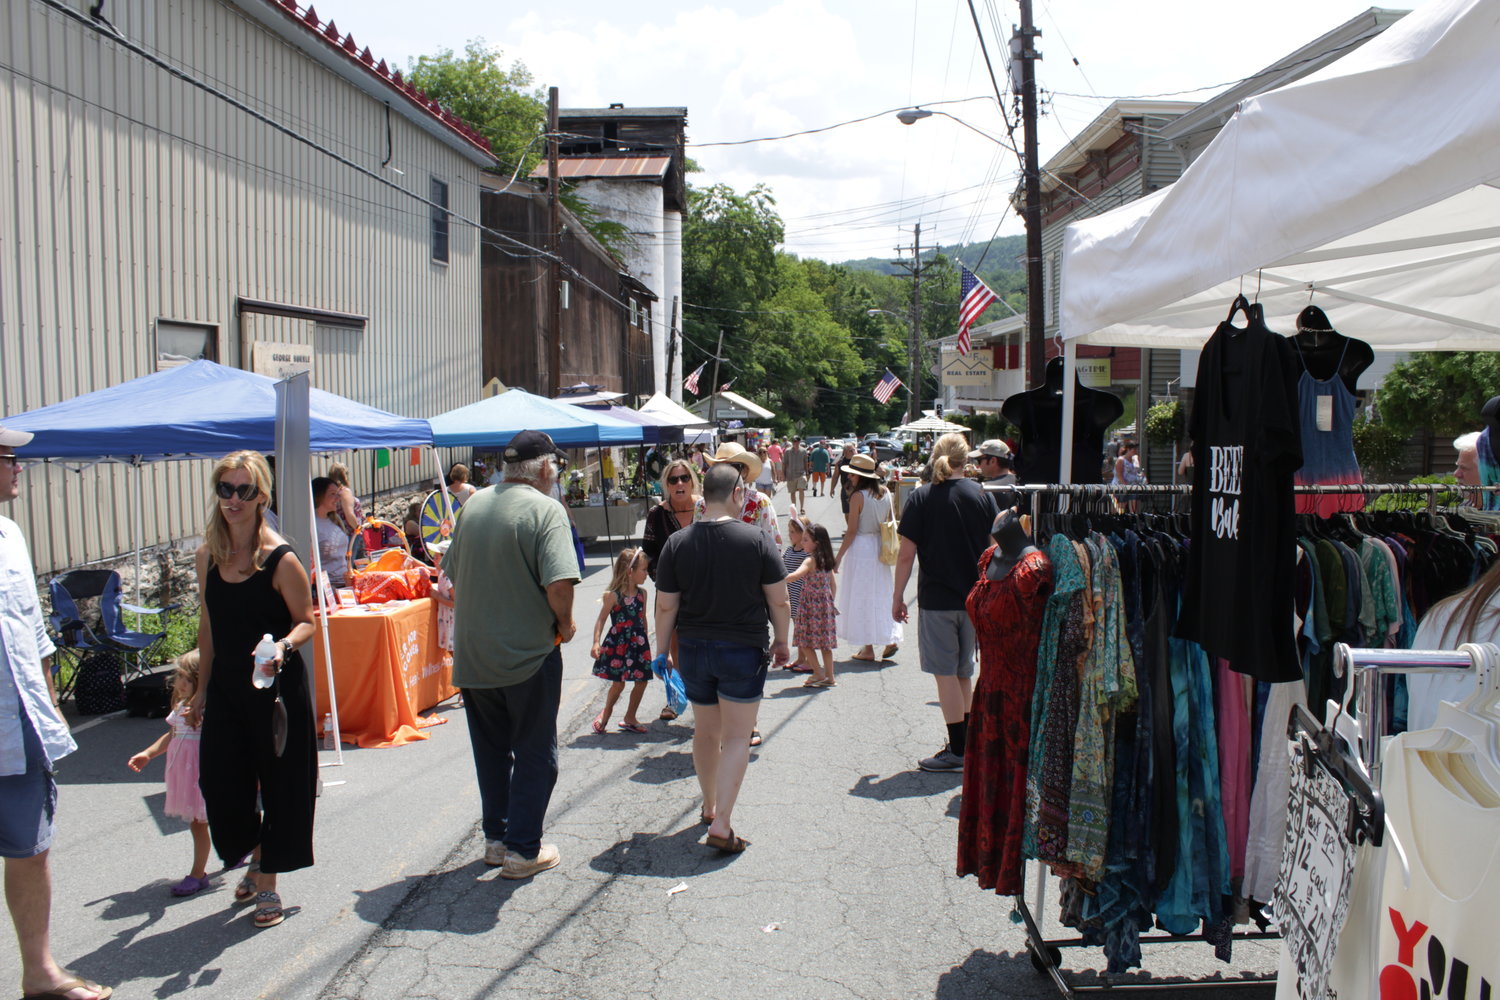 The hamlet of Callicoon is hopping most of the time and especially during the annual country fair.